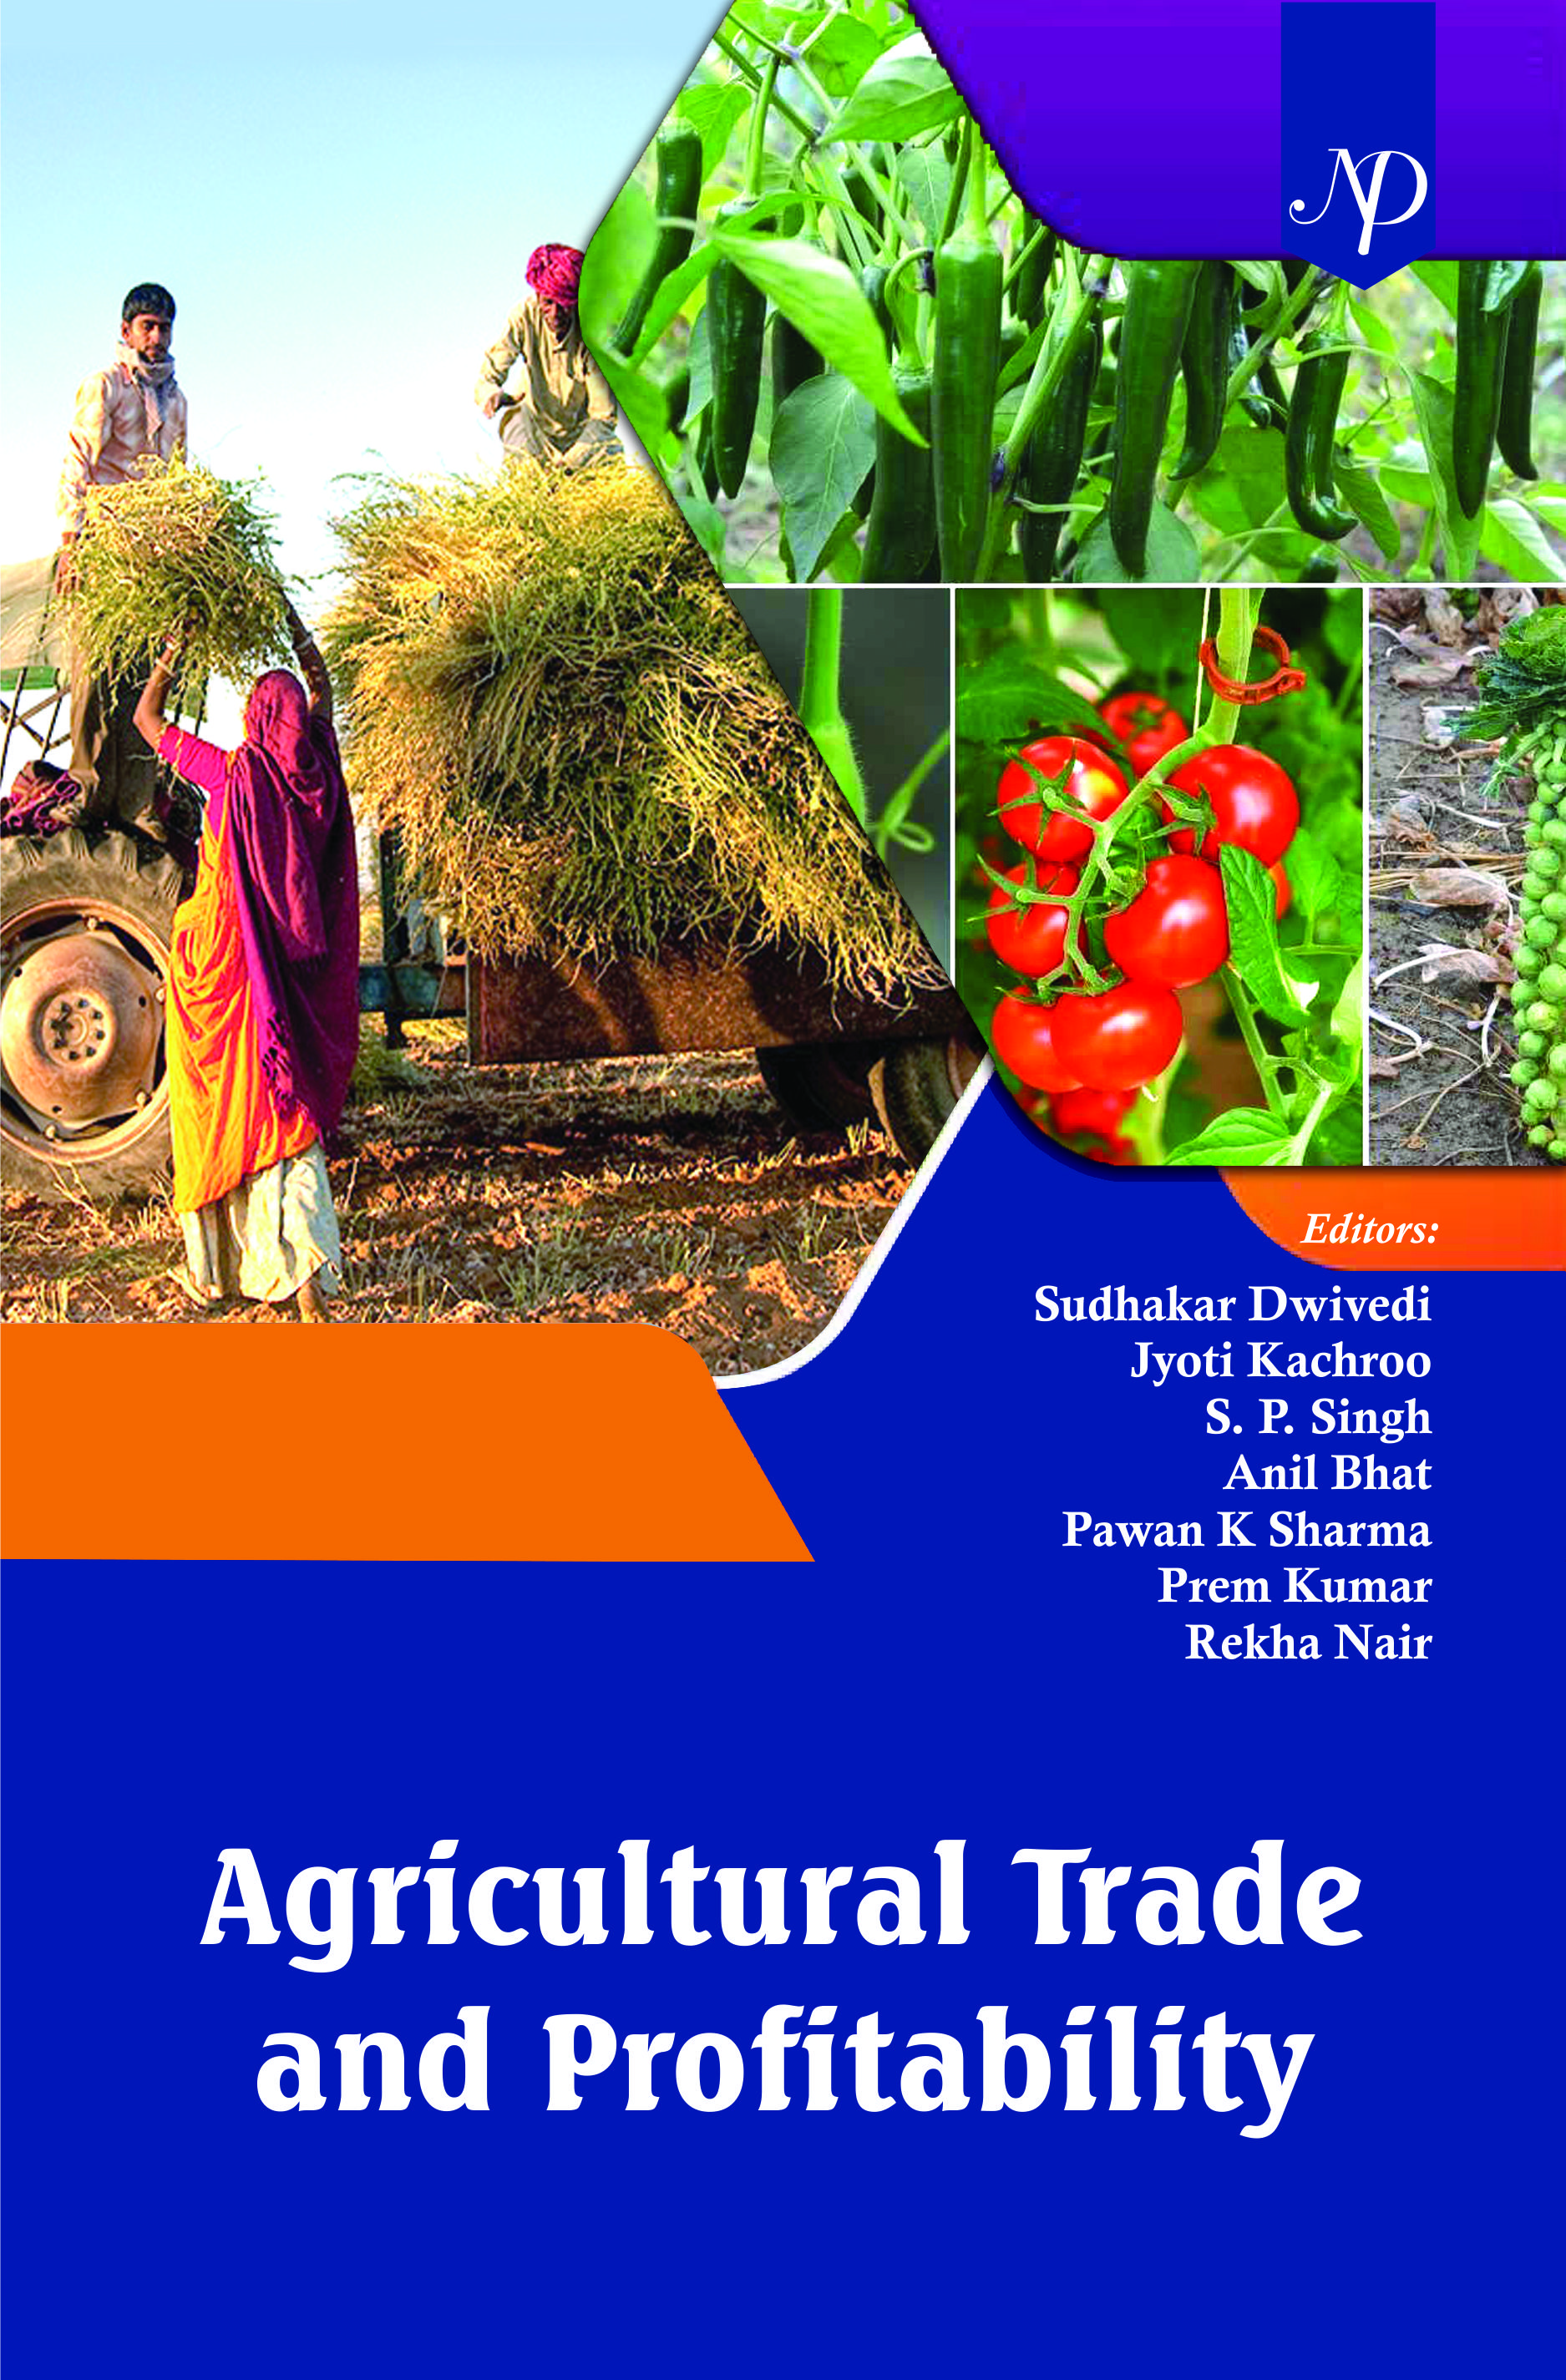 Agriculture Trade and Profitability Cover.jpg